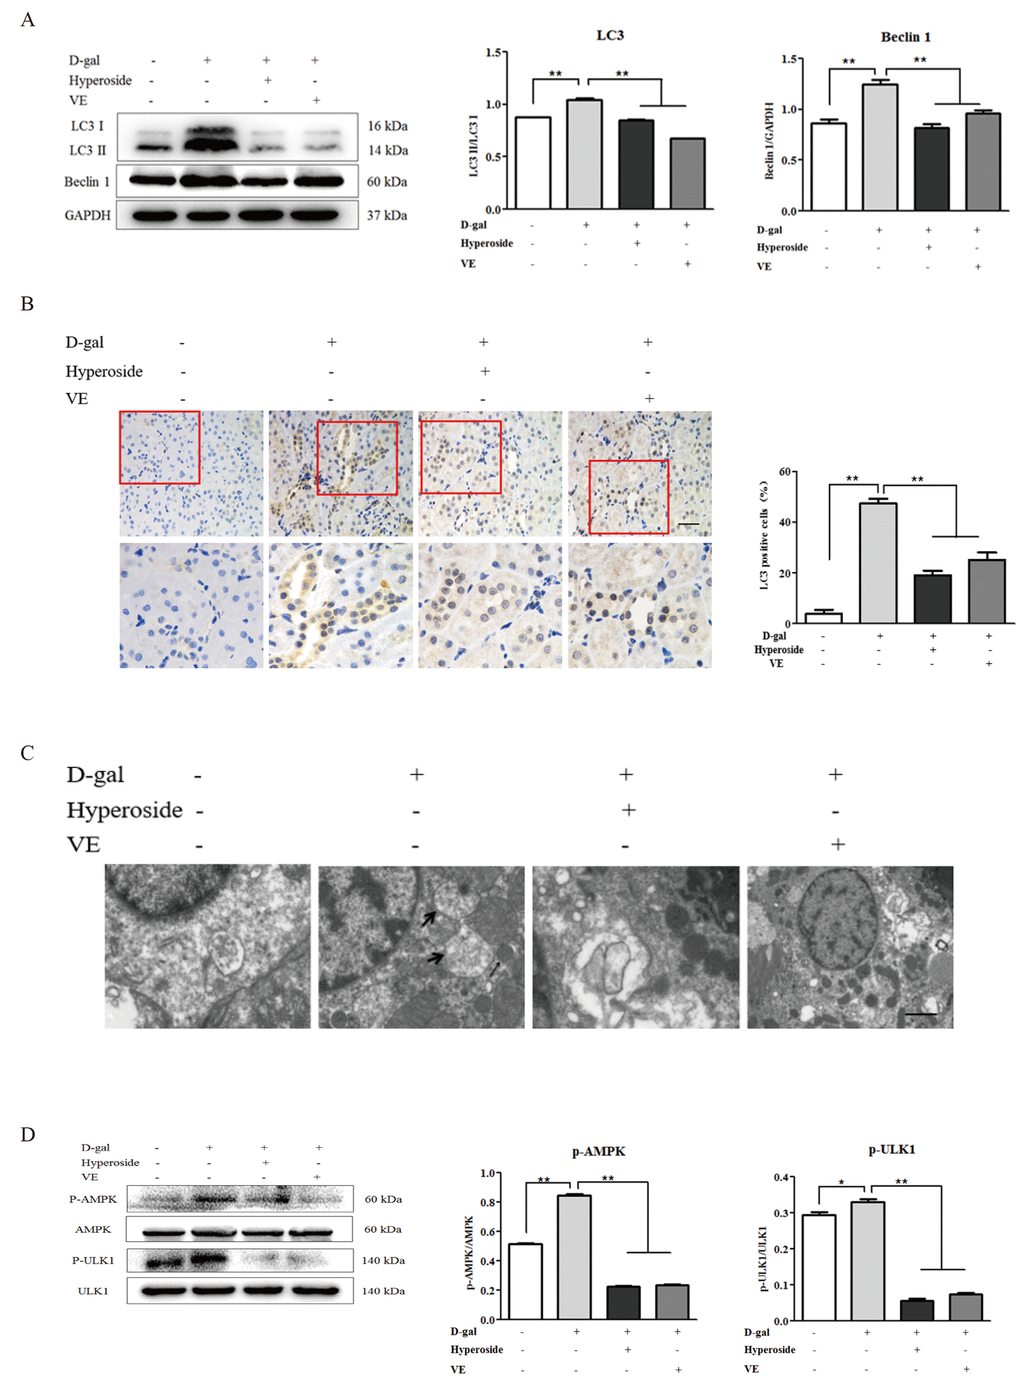 The effects of hyperoside and vitamin E on autophagic activity and the AMPK-ULK1 signaling pathway in vivo. (A) A WB analysis of LC3 I/II and Beclin1 in the kidneys from the rats in the control, the 8 week-D-gal, the D-gal + Hyperoside and the D-gal + VE groups. (B) Immunohistochemical staining of LC3 and the percentage of the positively stained areas of LC3 in the control, the 8 week-D-gal, and the D-gal + Hyperoside groups. Scale bar = 20 μm. (C) The morphological changes in the renal tubular cells of the rats in the control, the 8 weeks-D-gal, the D-gal + Hyperoside and the D-gal + VE groups by transmission electron microscopy. The black arrows show the autophagosomes with the characteristic morphology of a double membrane. (D) A WB analysis of p-AMPK, AMPK, p-ULK1 and ULK1 in the kidneys of the rats in the control, the 8 weeks-D-gal, the D-gal + Hyperoside and the D-gal + VE groups. The data are expressed as the mean ± SD, (n=3), *P **P 